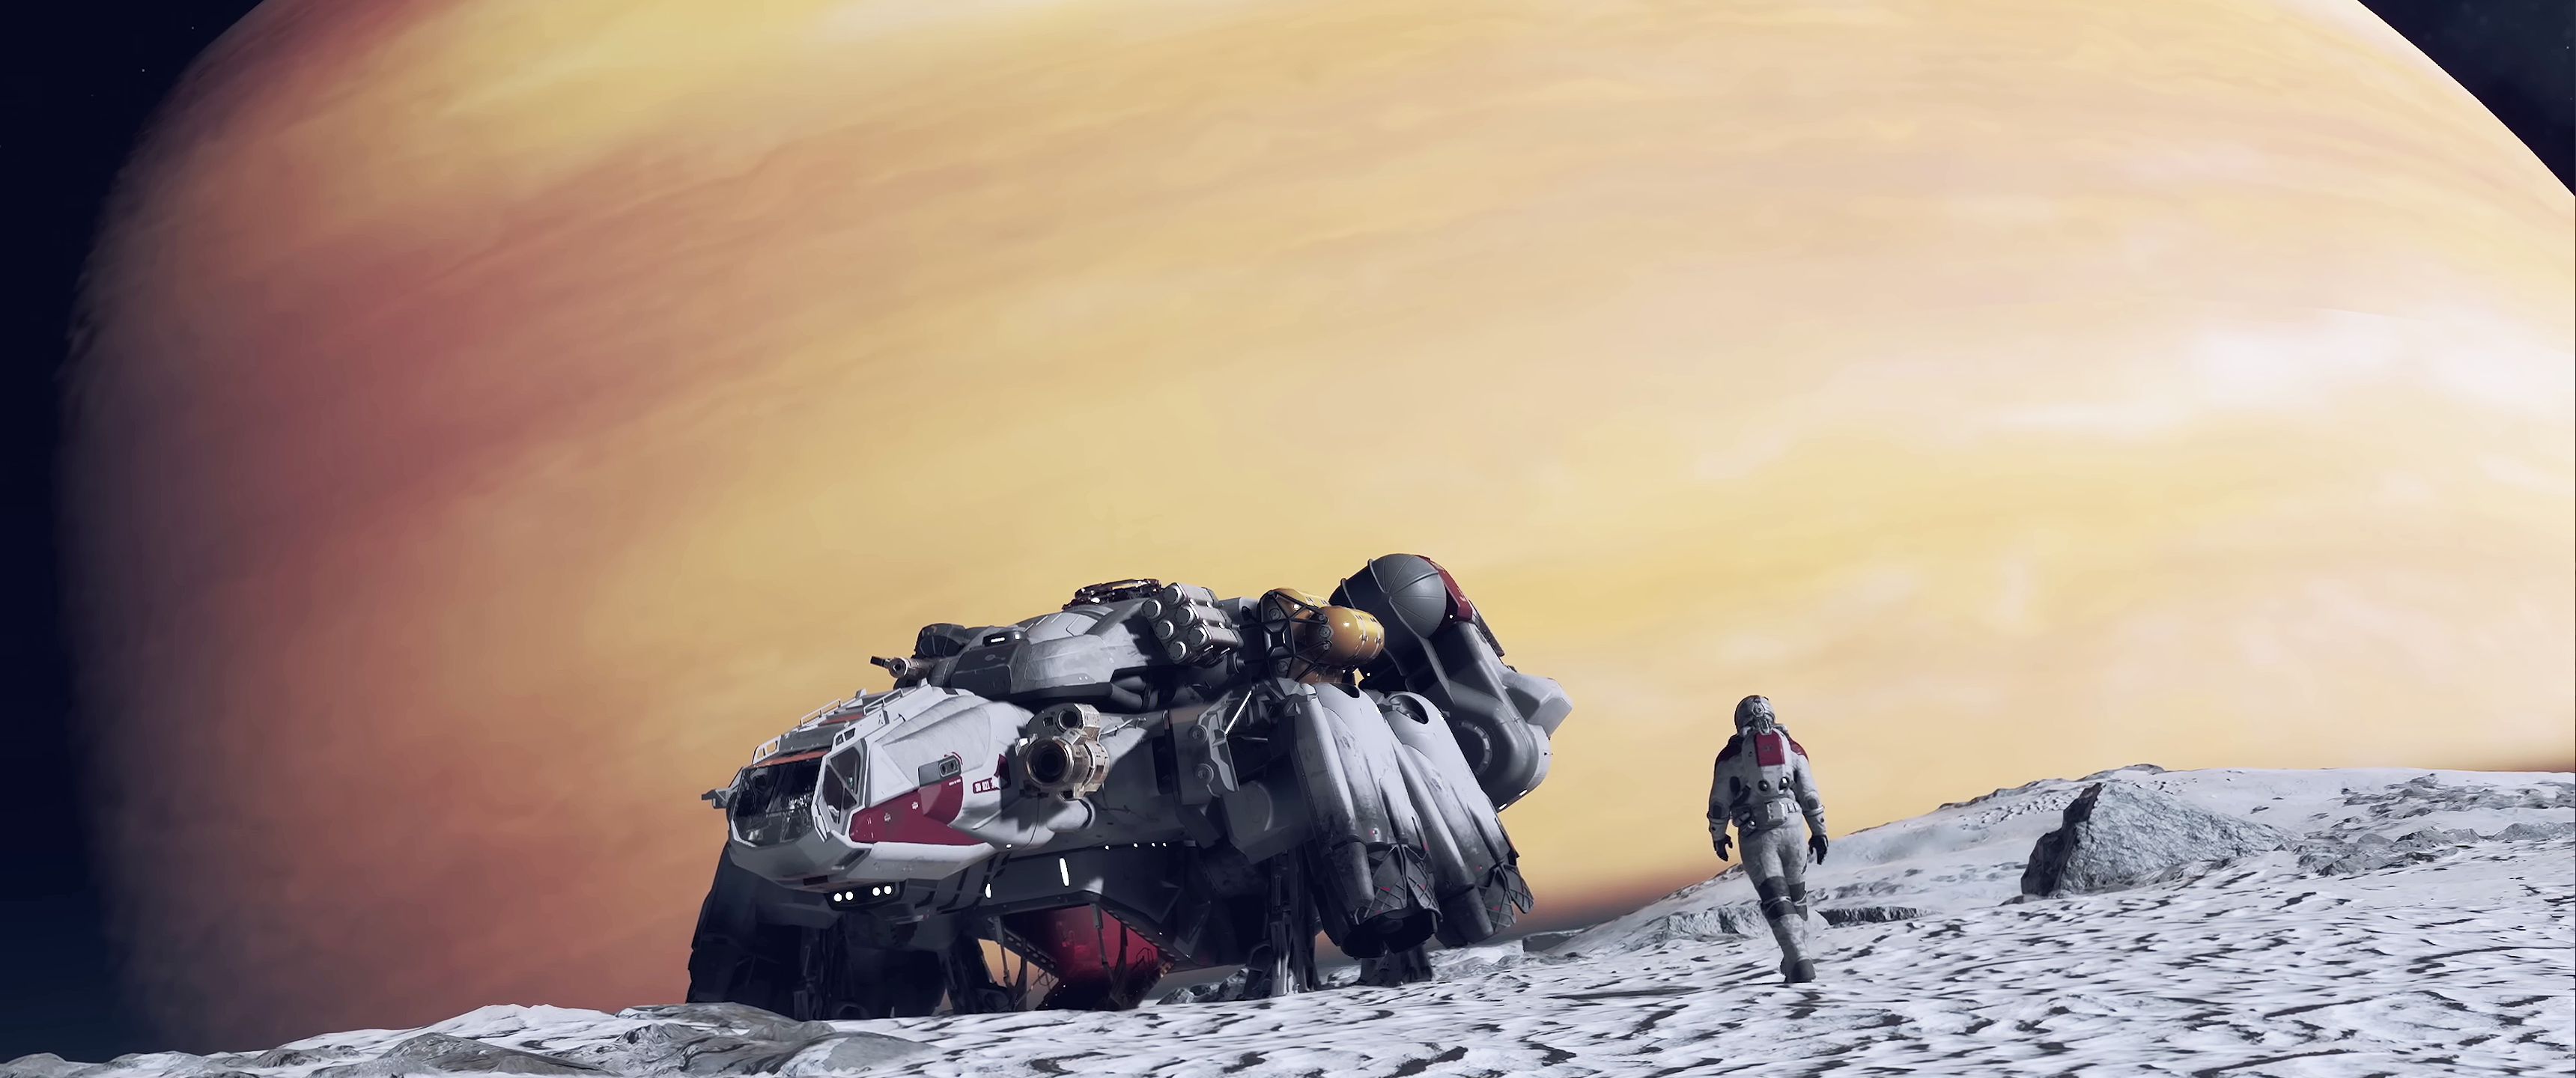 Starfield Bethesda Softworks Video Games Video Game Characters Desolate Space Planet Spacesuit CGi 3440x1440